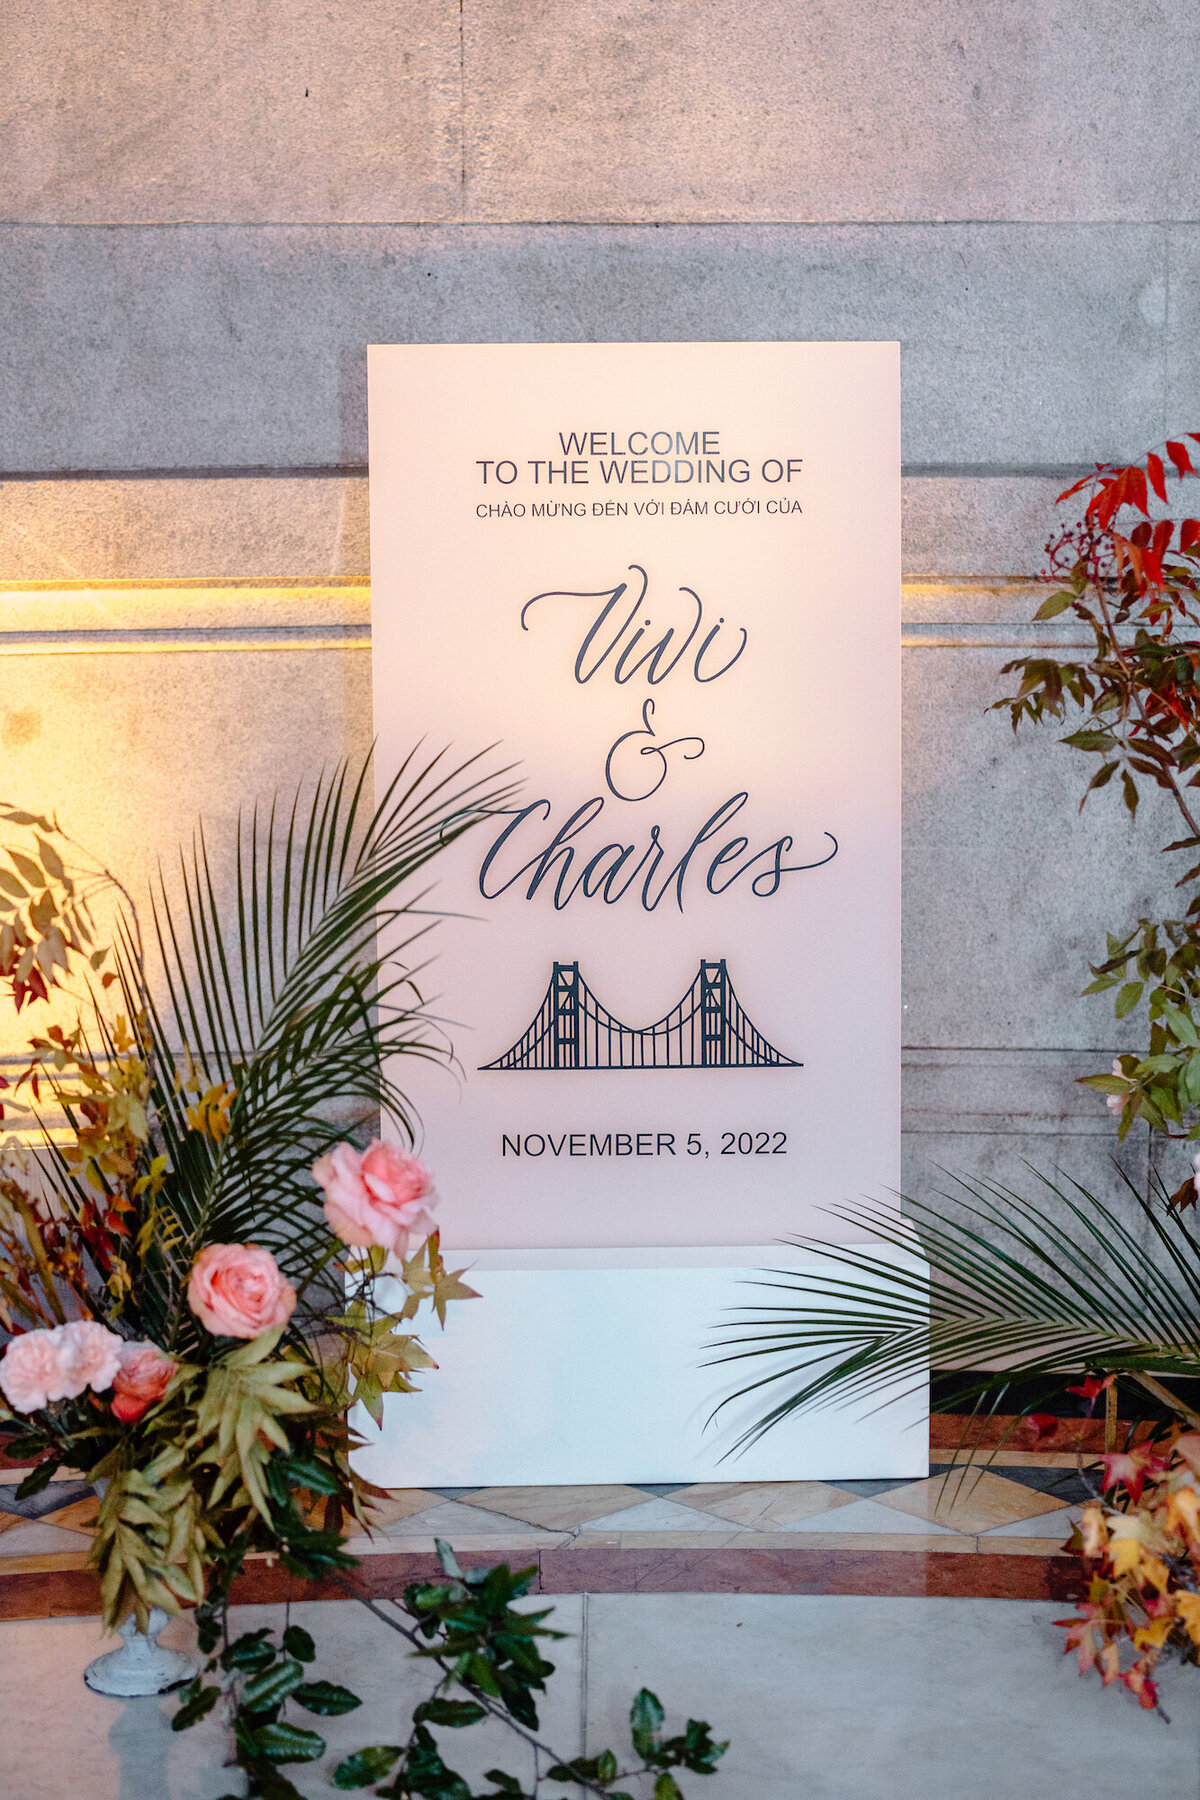 Black calligraphy lettering on a white frosted acrylic welcome sign, surrounded by florals, with a drawing of the golden gate bridge